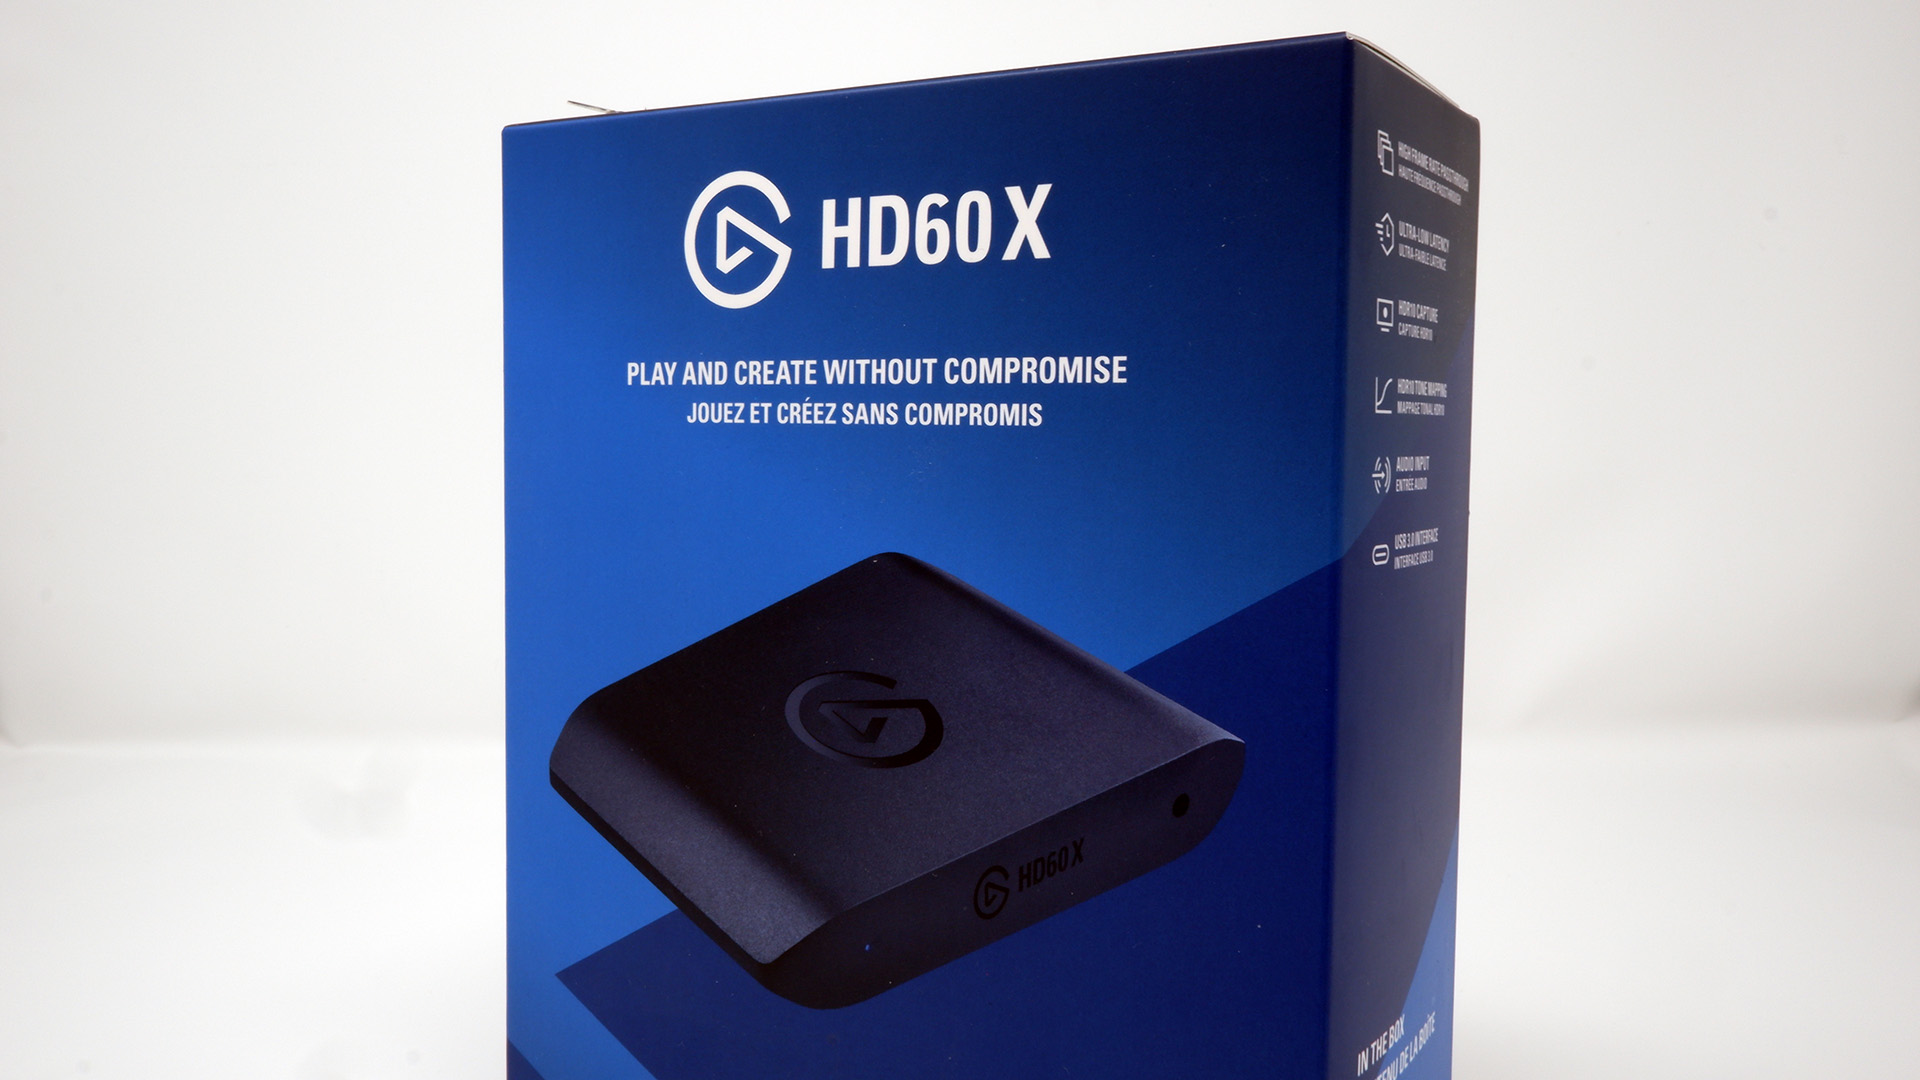 Elgato HD60 X capture card with box and cable